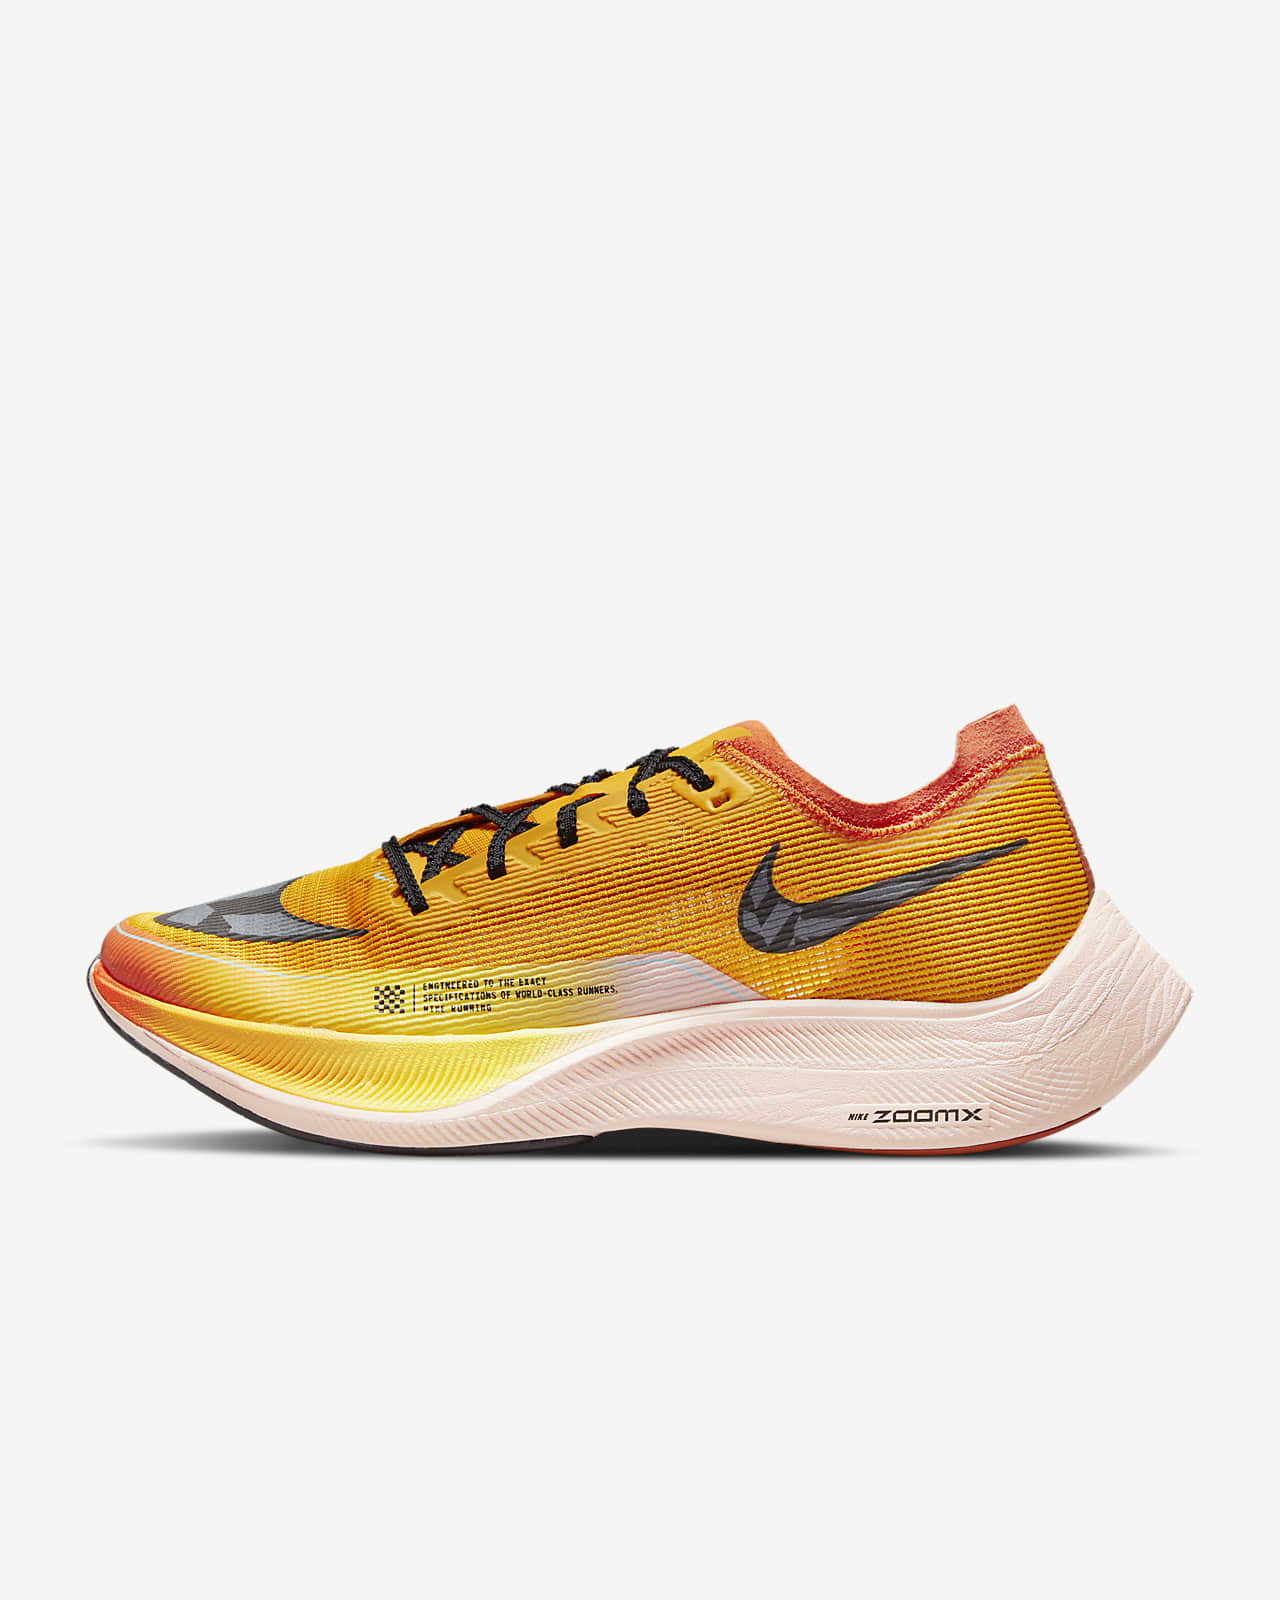 Nike Vaporfly 2 Road Racing Shoes